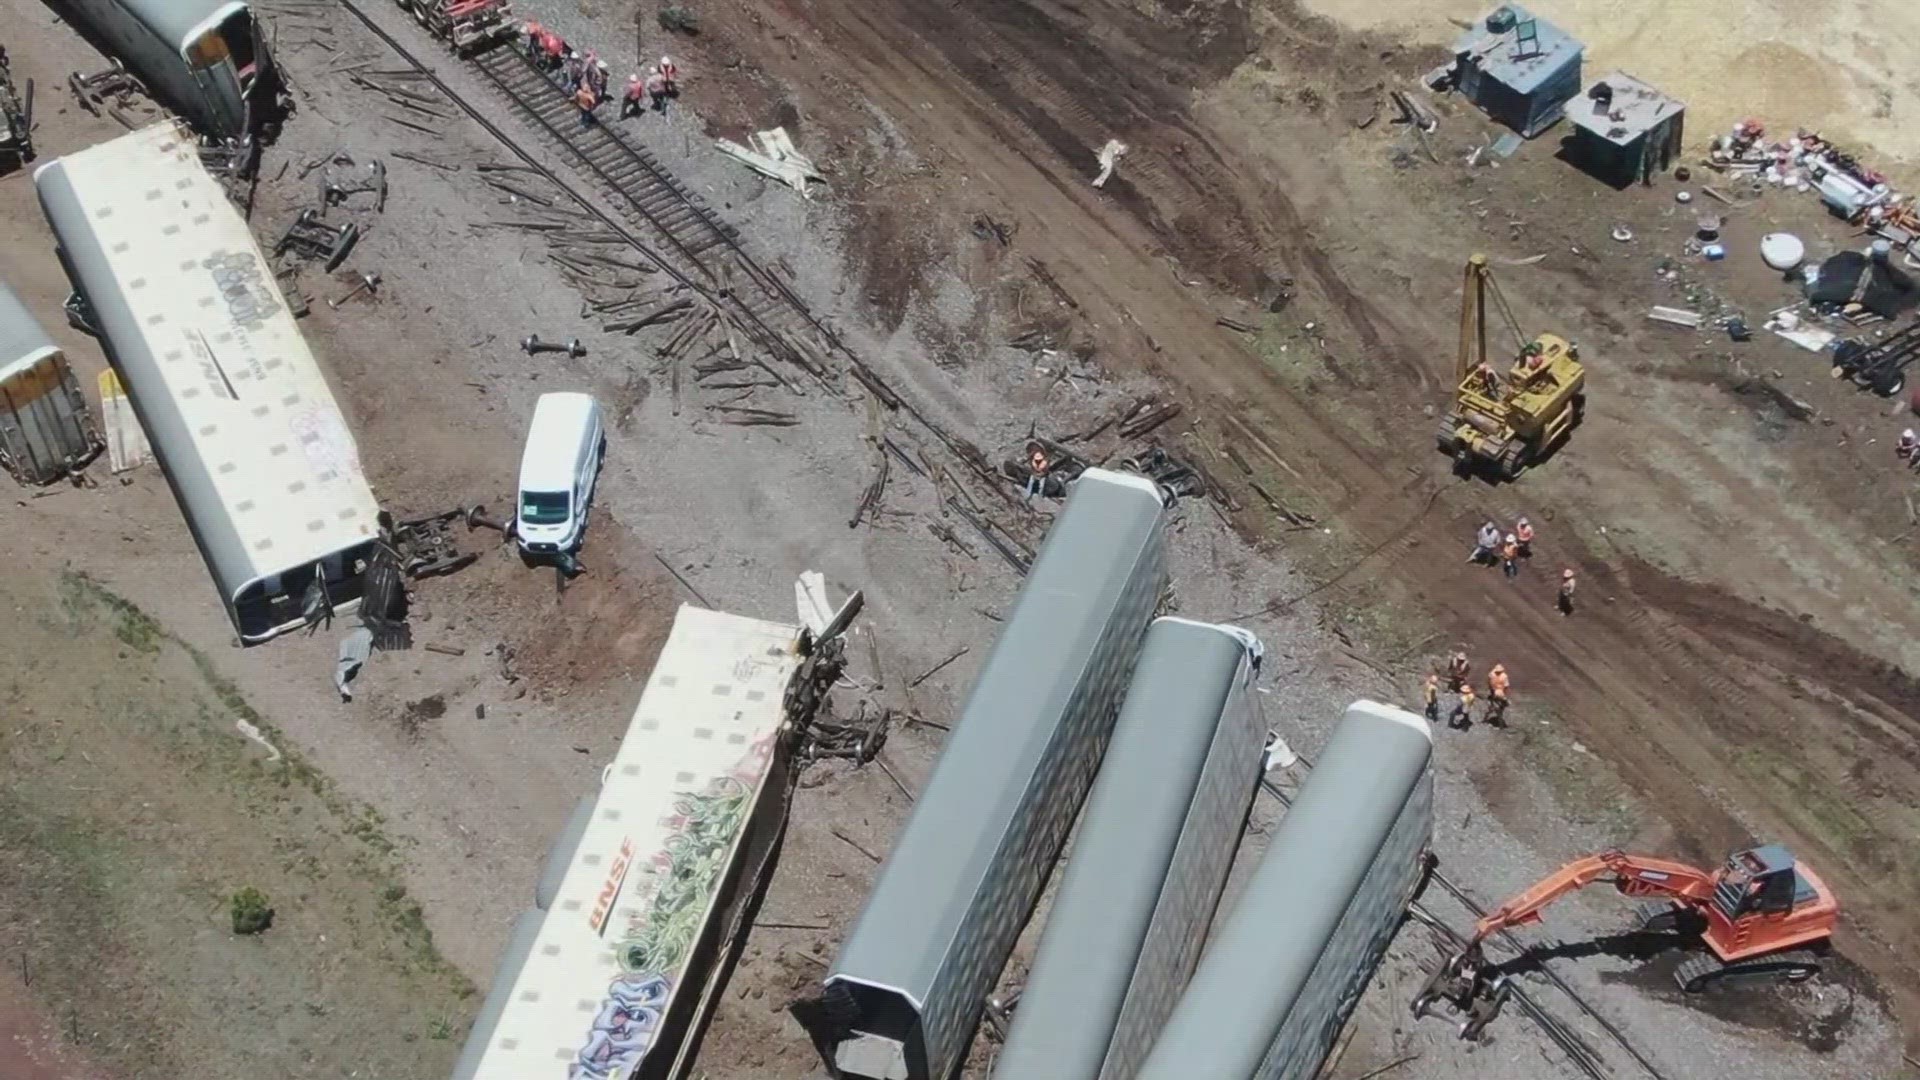 No injuries were reported in the 20-car train derailment in Coconino County but officials say the train tracks were badly damaged.